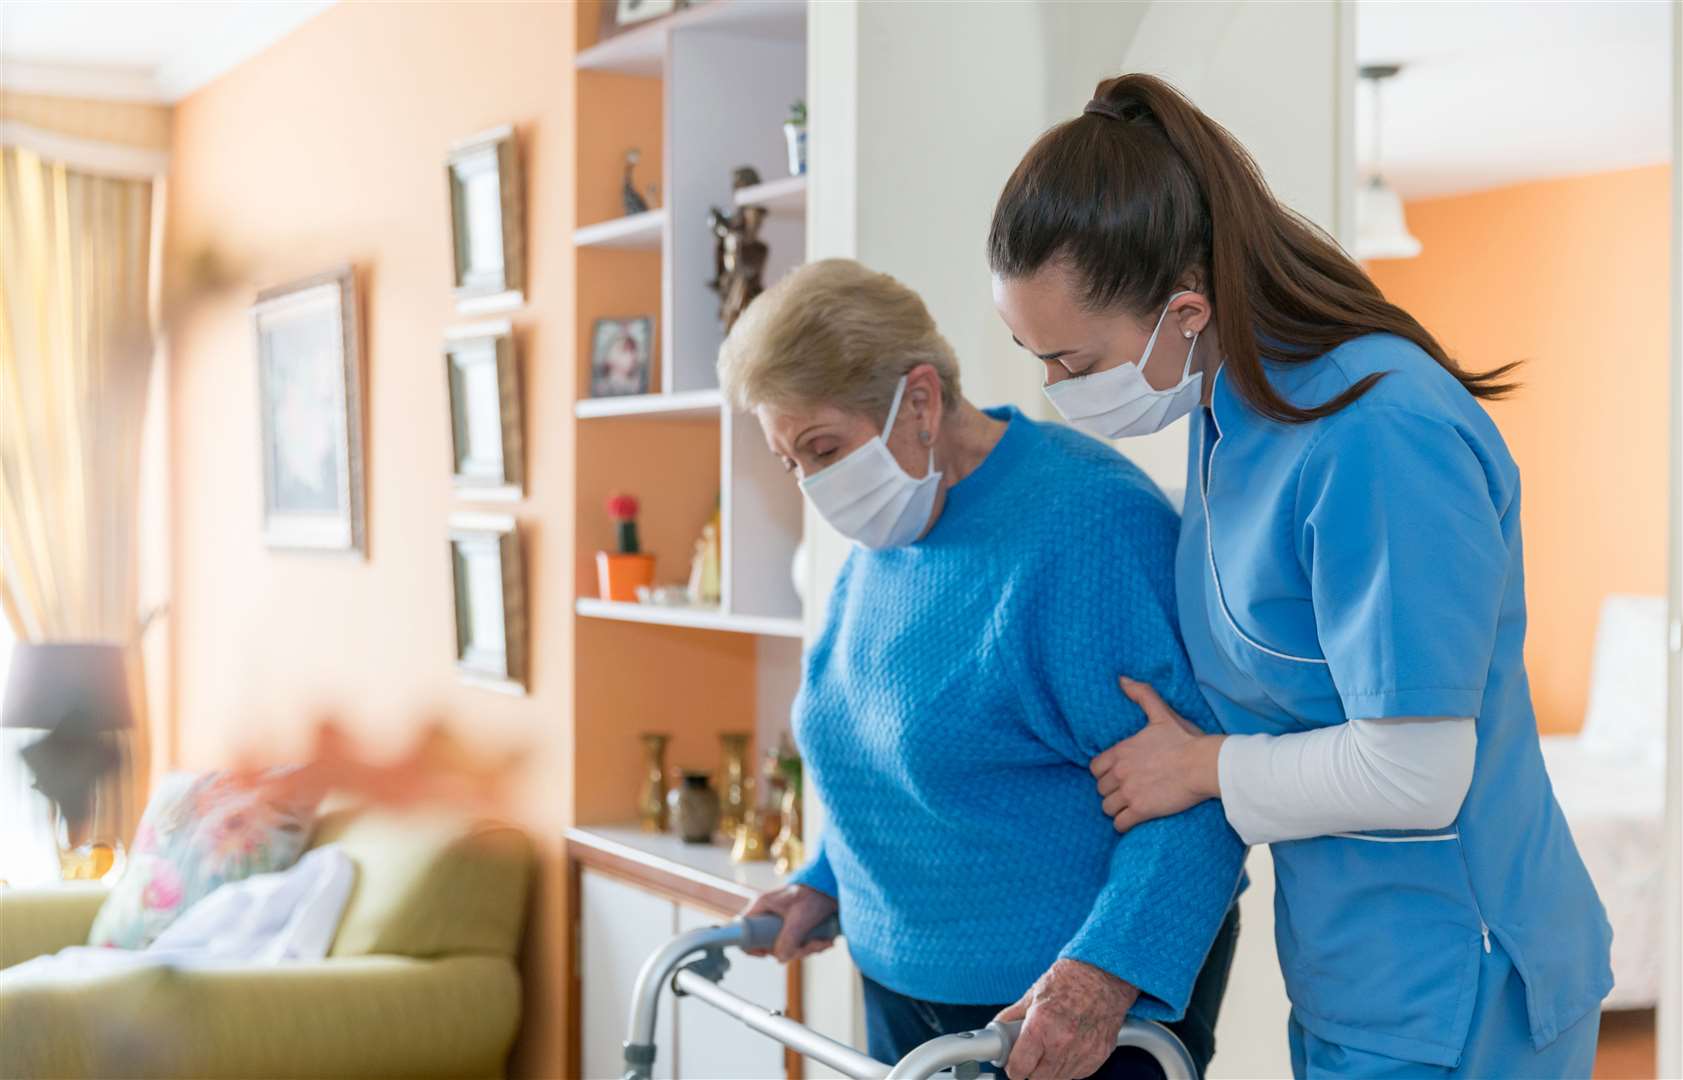 ‘A majority believe our communities became more caring and connected during the pandemic’Photo: iStock